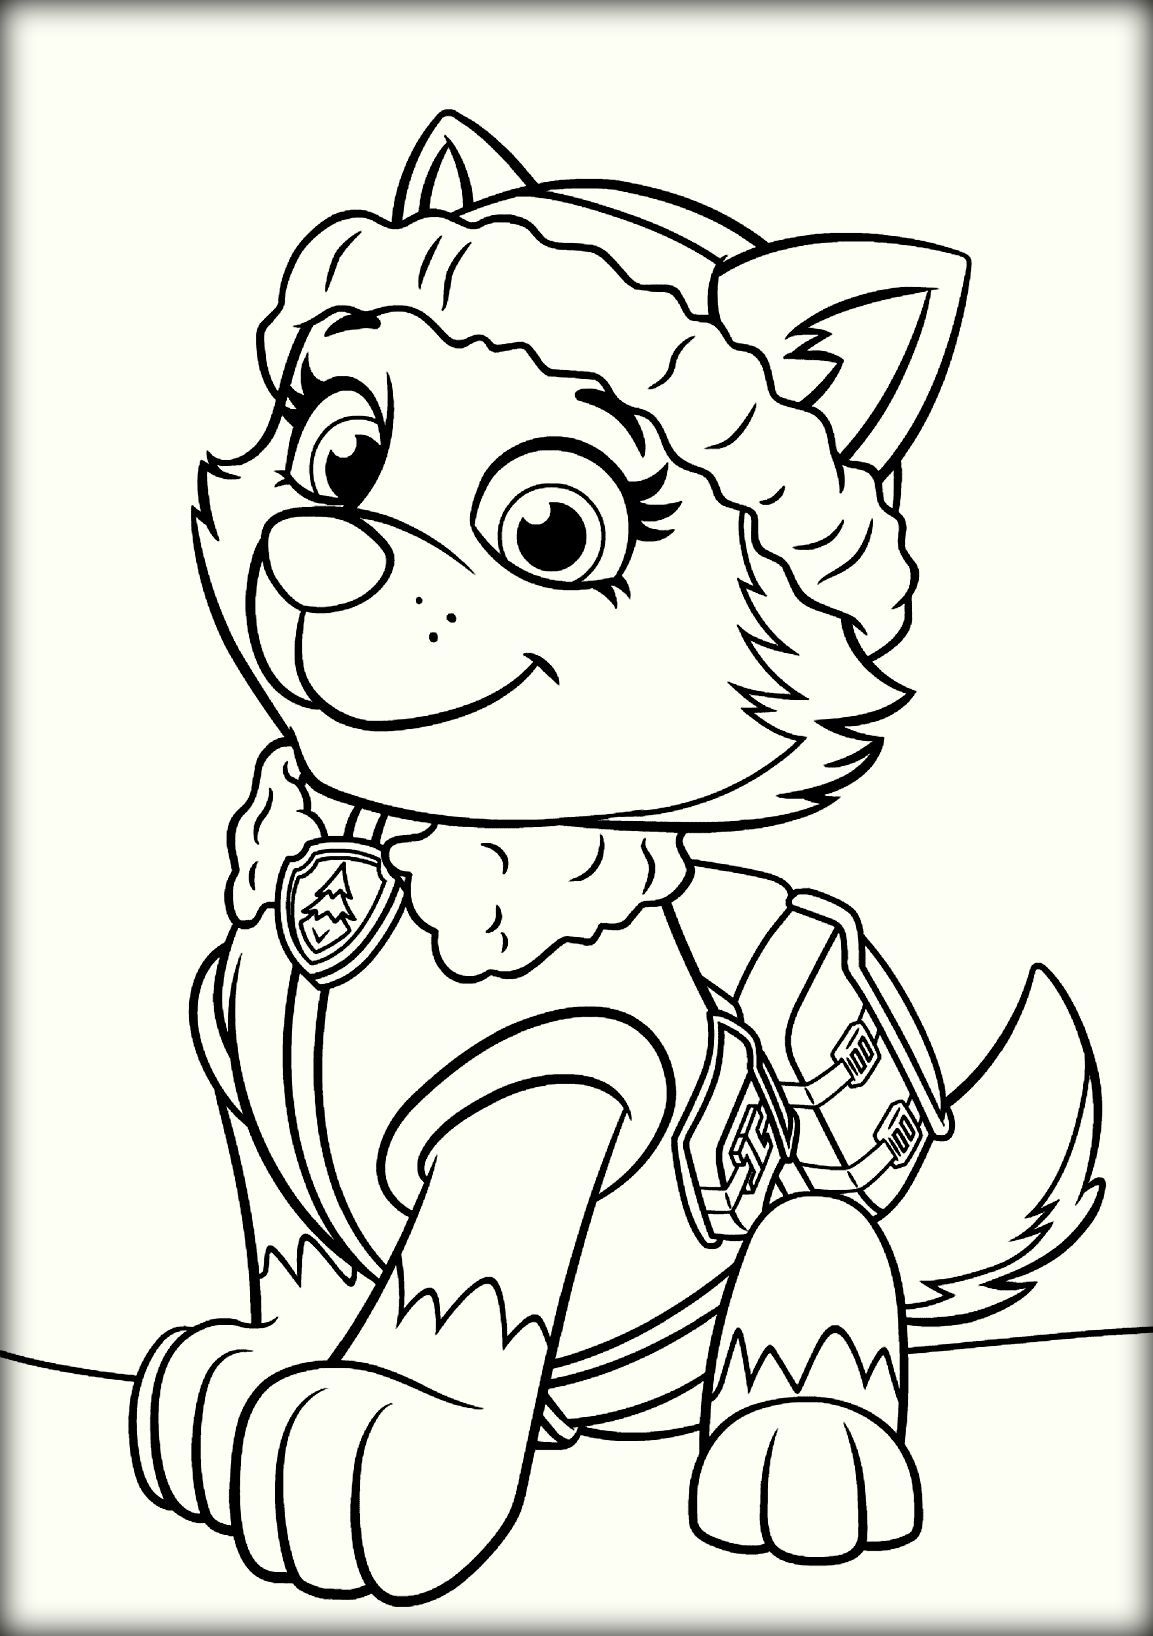 Cindy Lou Who Coloring Pages at GetColorings.com | Free printable